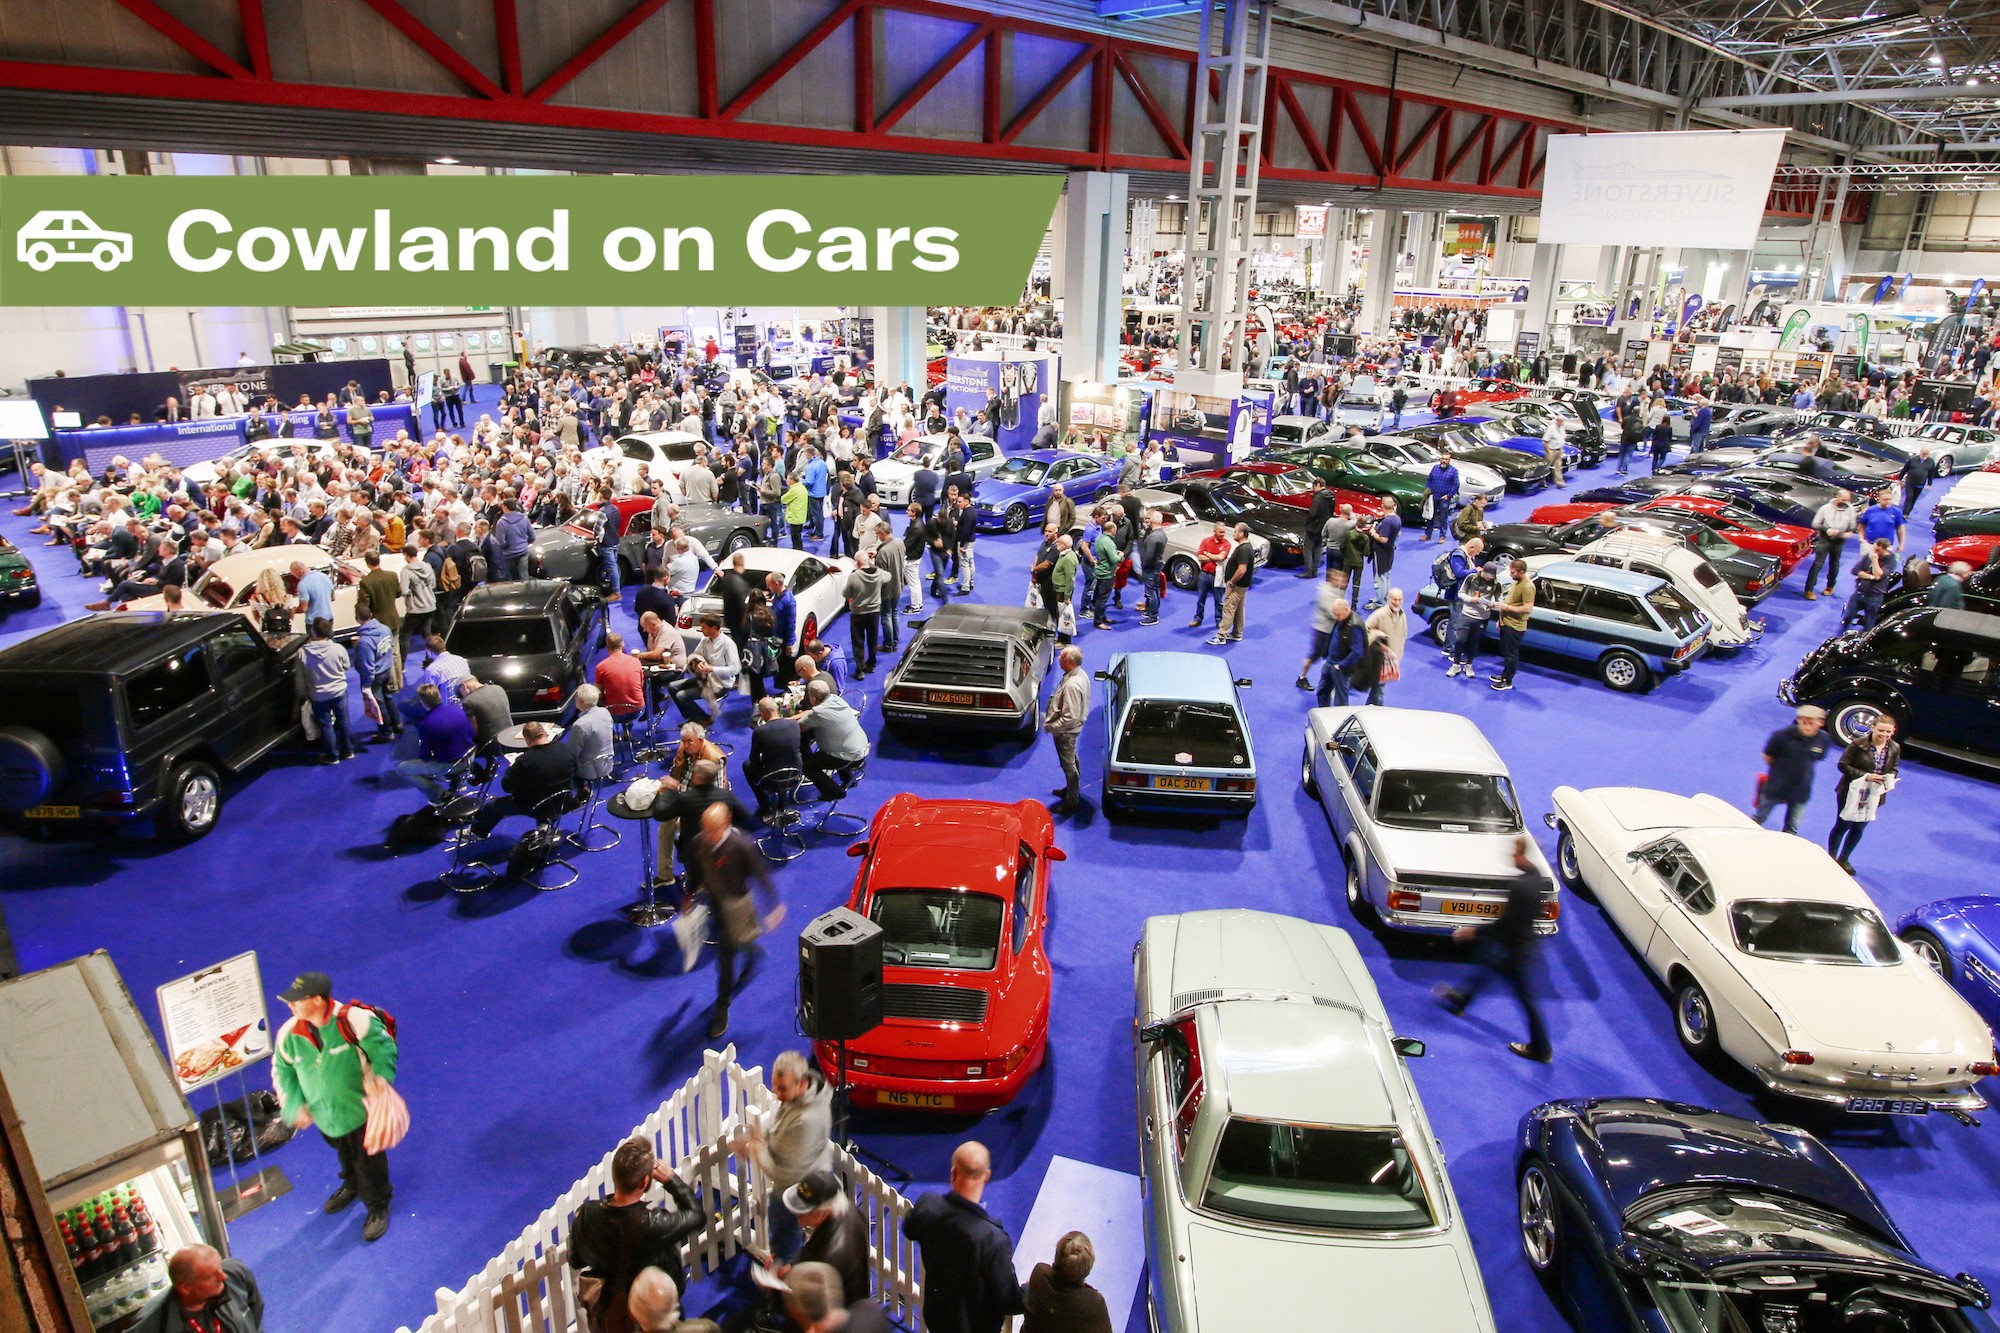 Hammer Time: The joy of buying a bargain at classic car auctions